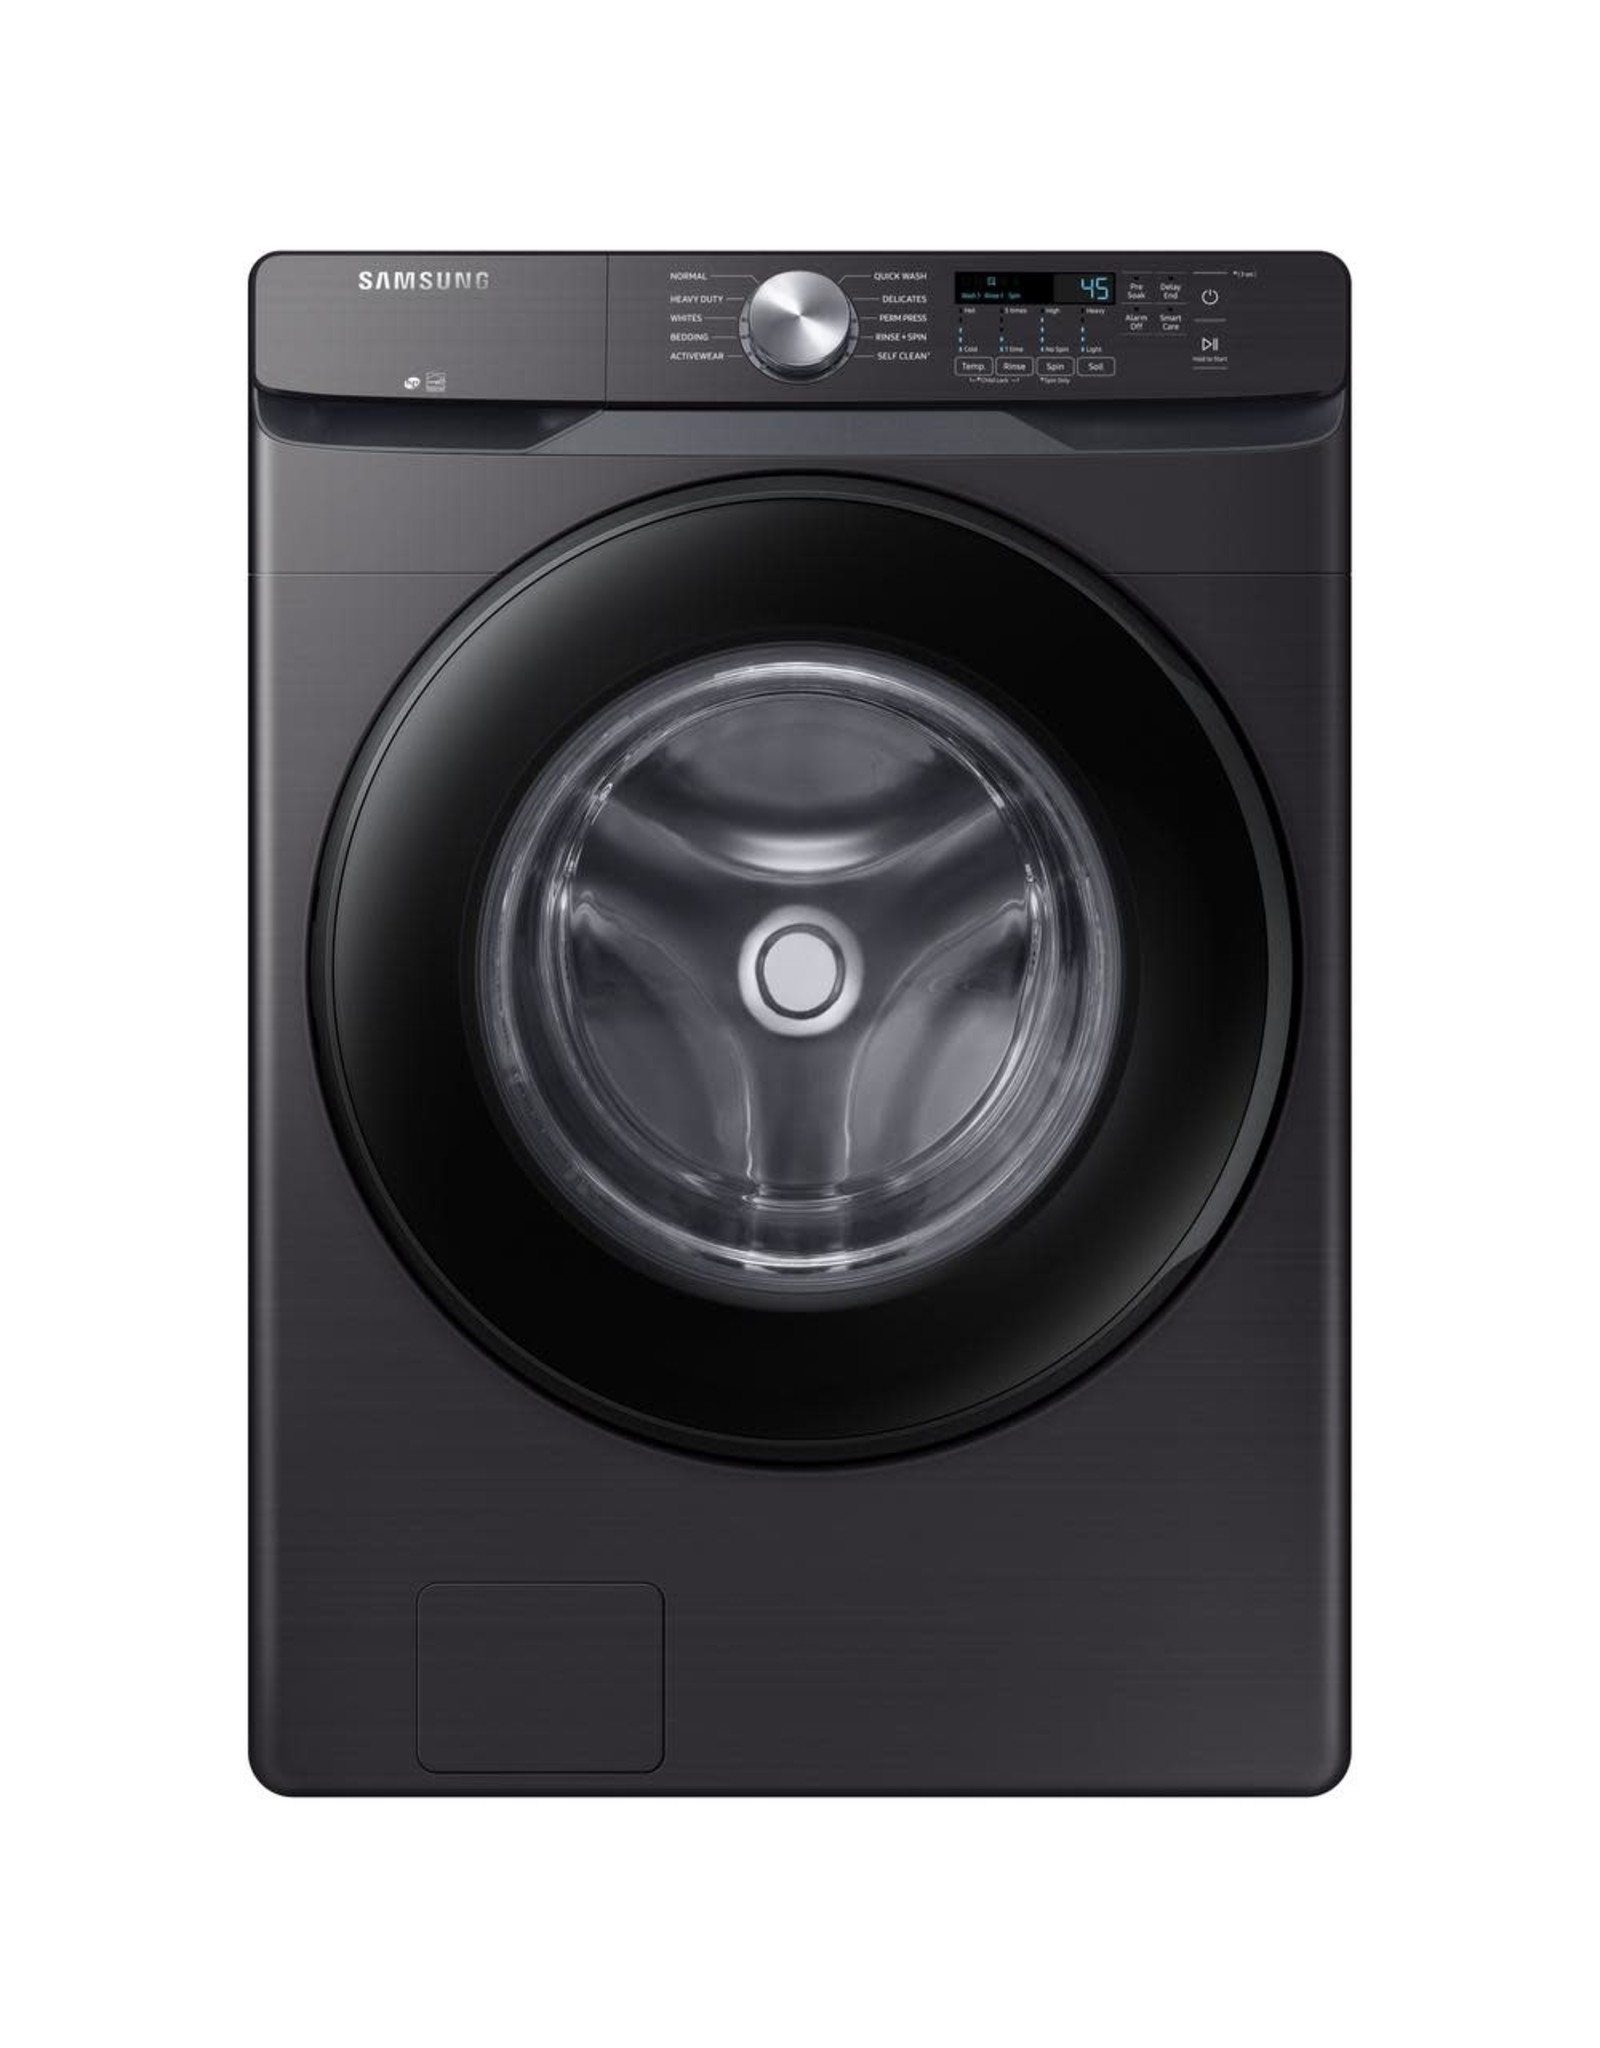 SAMSUNG WF45T6000AV 27 in. 4.5 cu. ft. High-Efficiency Black Stainless Front Load Washing Machine with Self-Clean+, ENERGY STAR